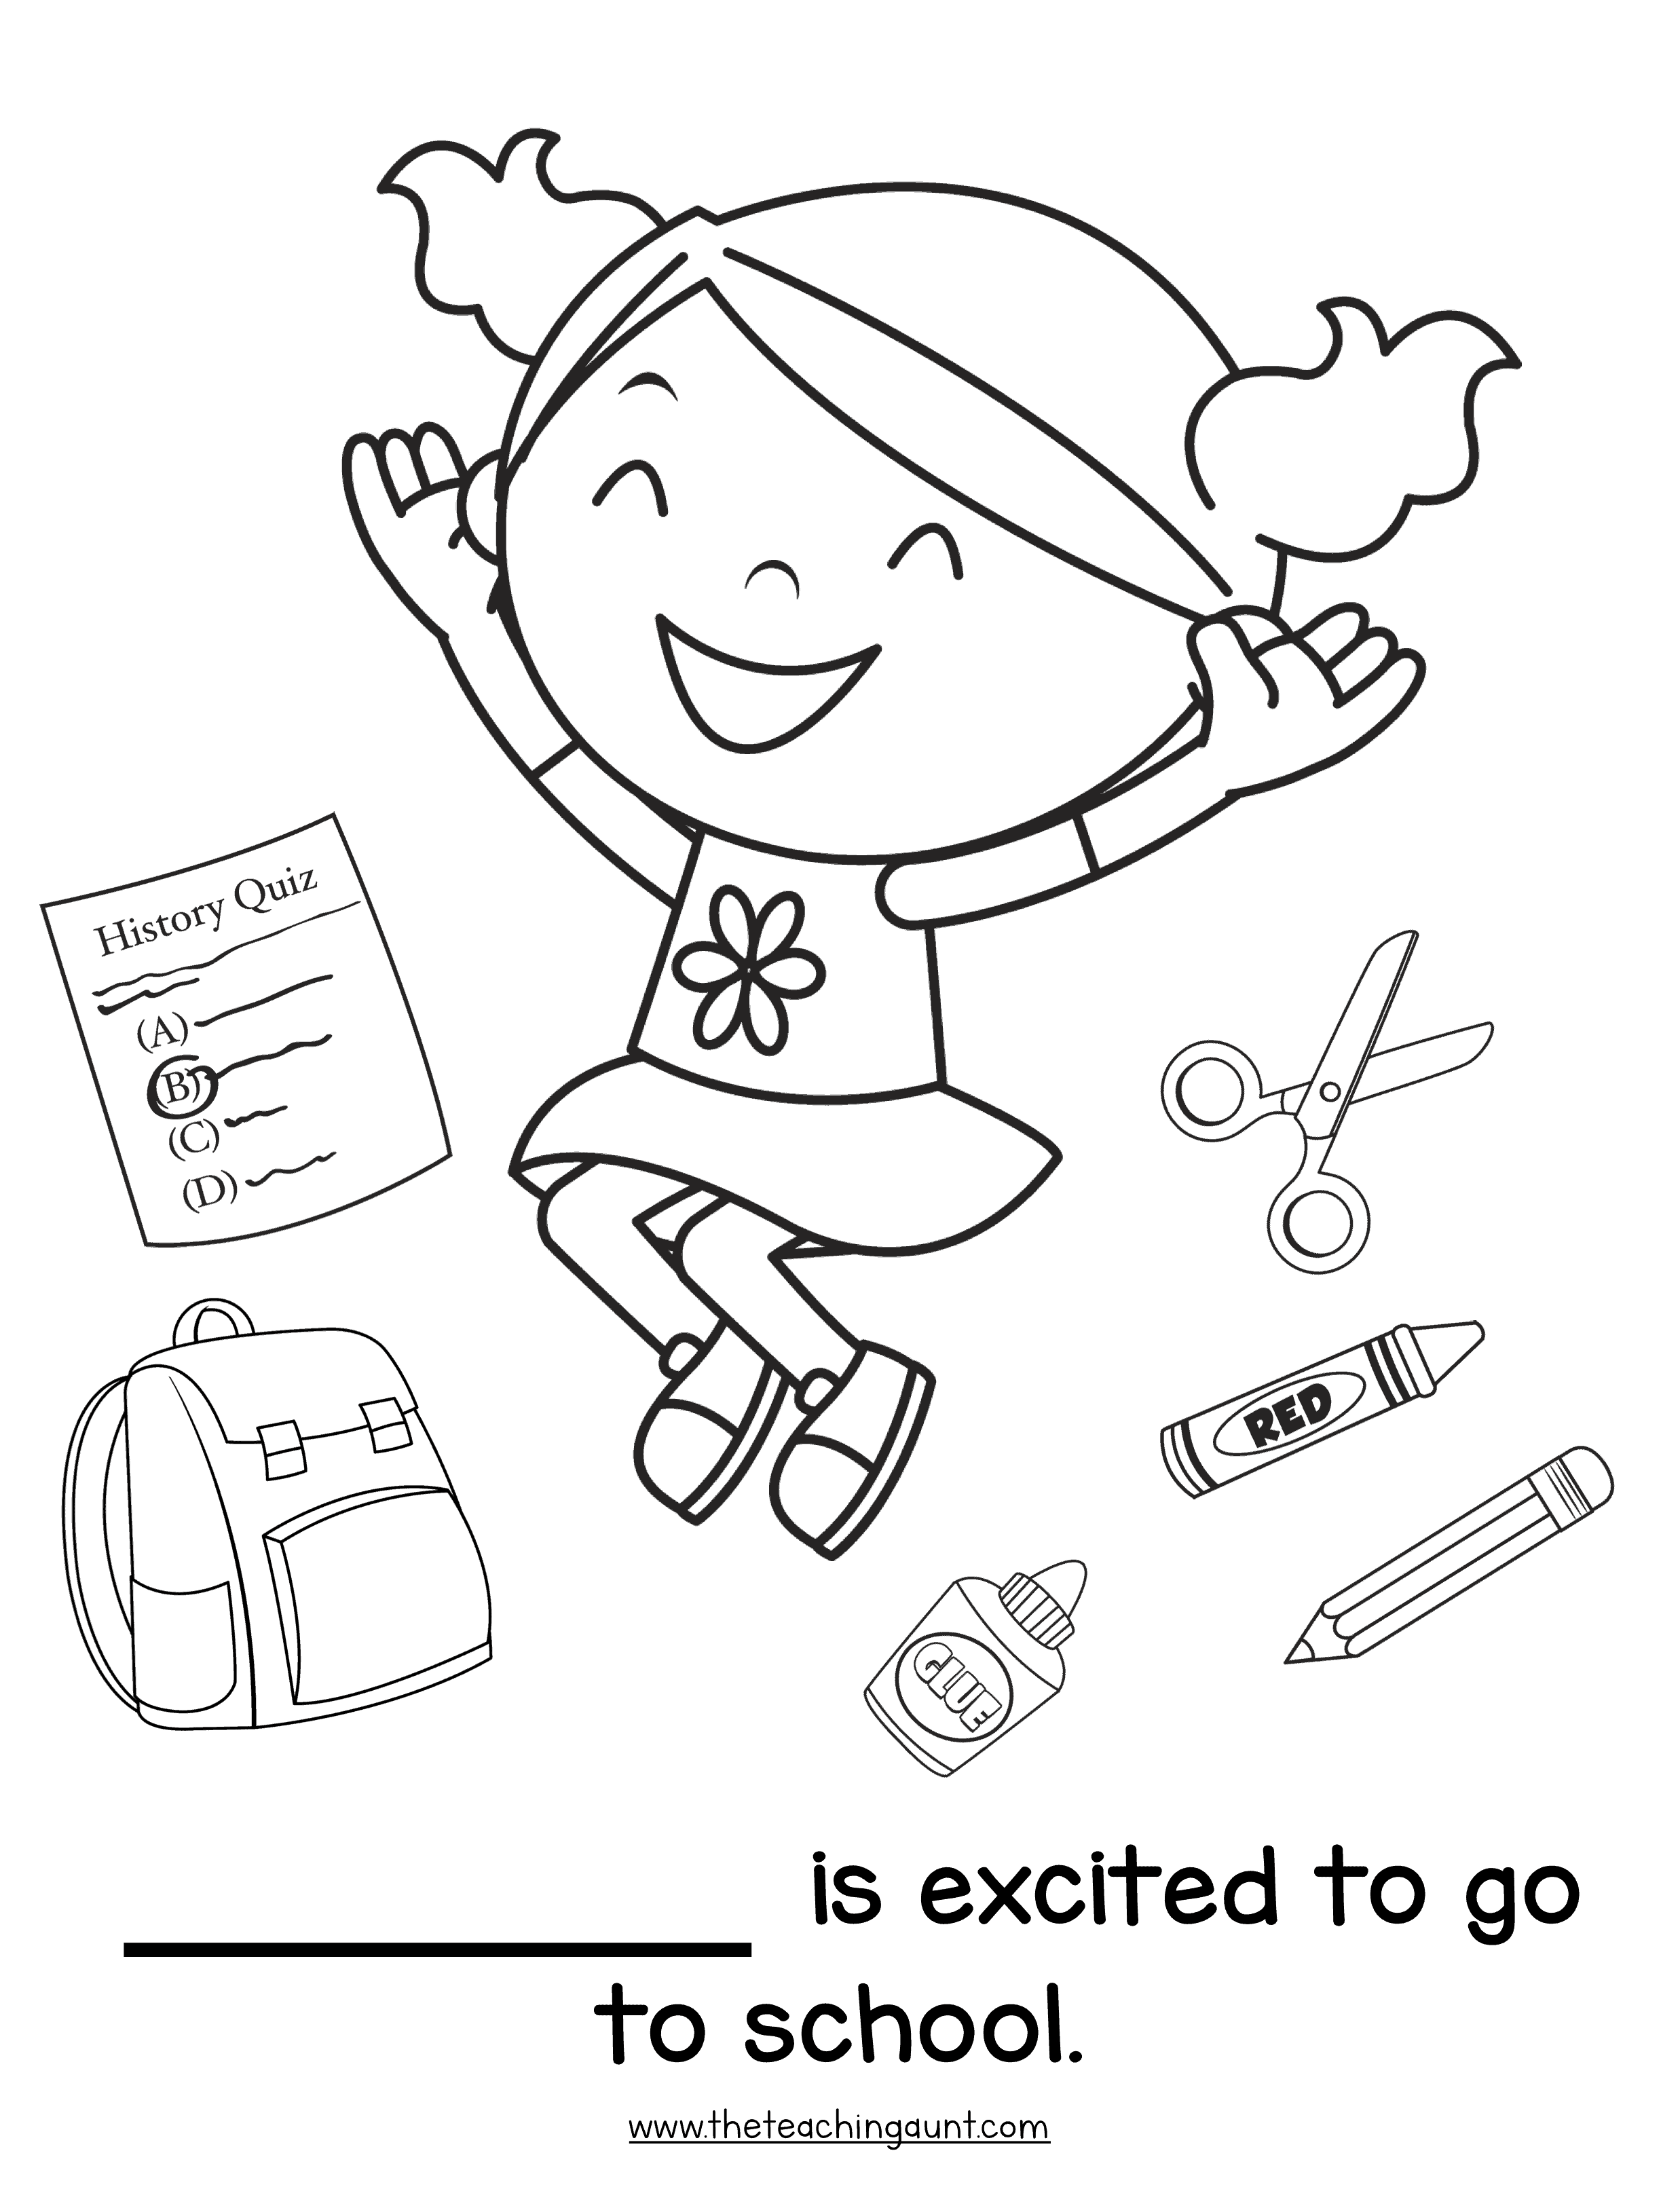 The Teaching Aunt Free Printable Coloring Pages for Preschoolers